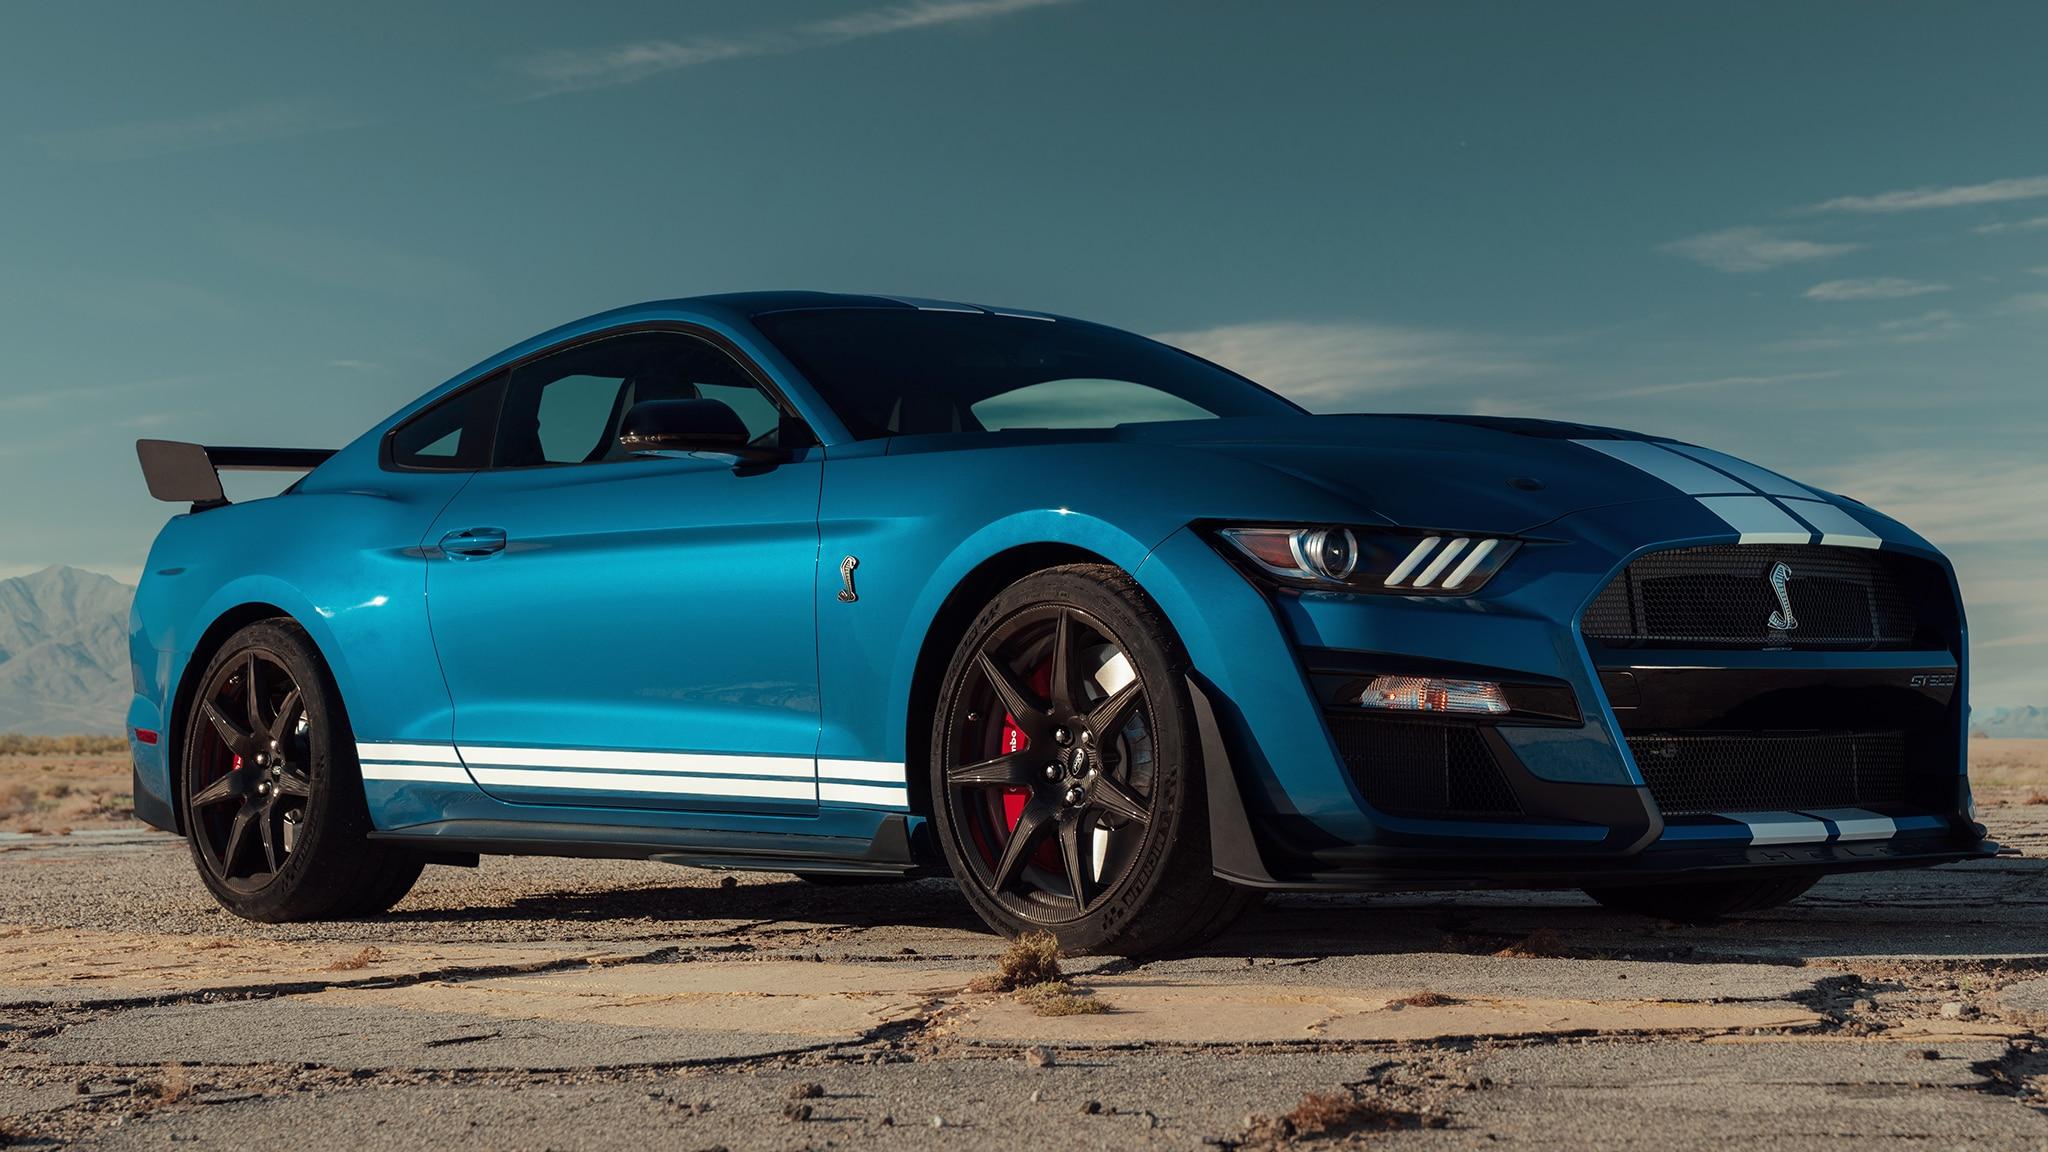 Ways the 2020 Ford Mustang Shelby GT500 ”R” Is Different from the Base GT500